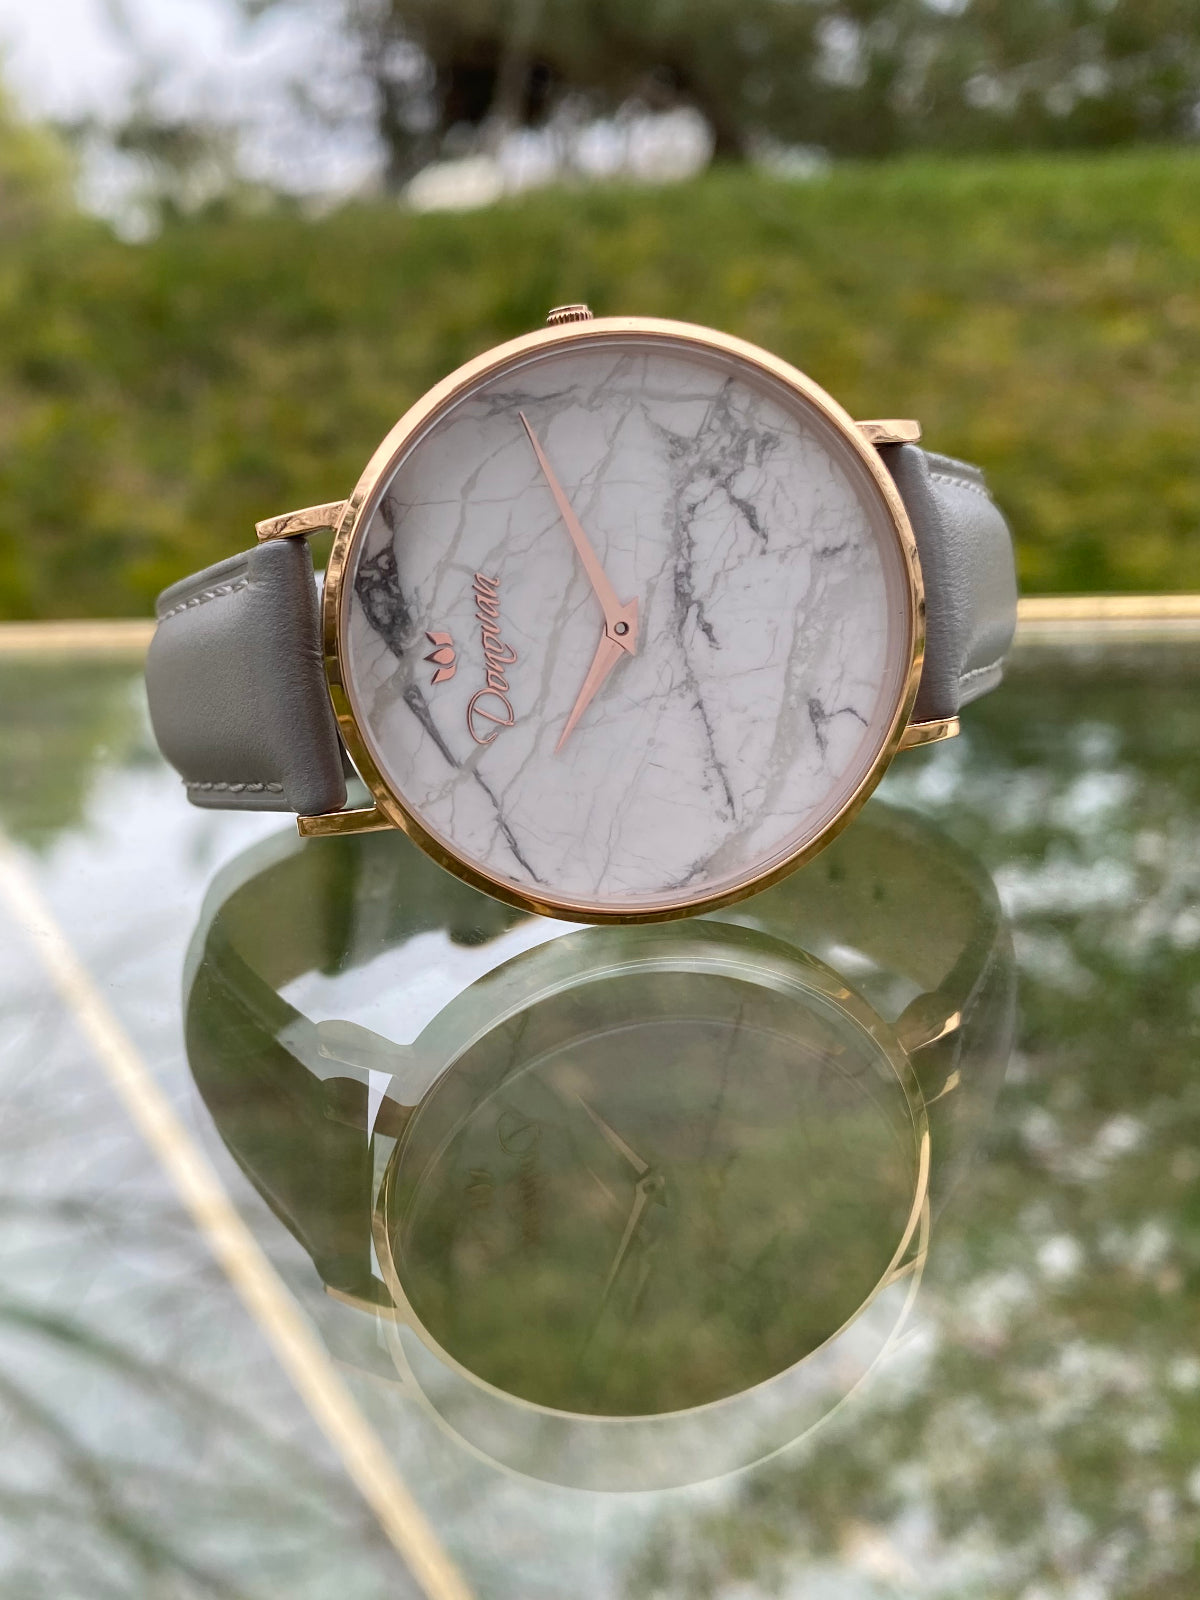 Vincero Collective - Italian Marble. Limited Edition. Your Move.  #liveyourlegacy Shop this watch →https://vincerocollective.com/marble |  Facebook